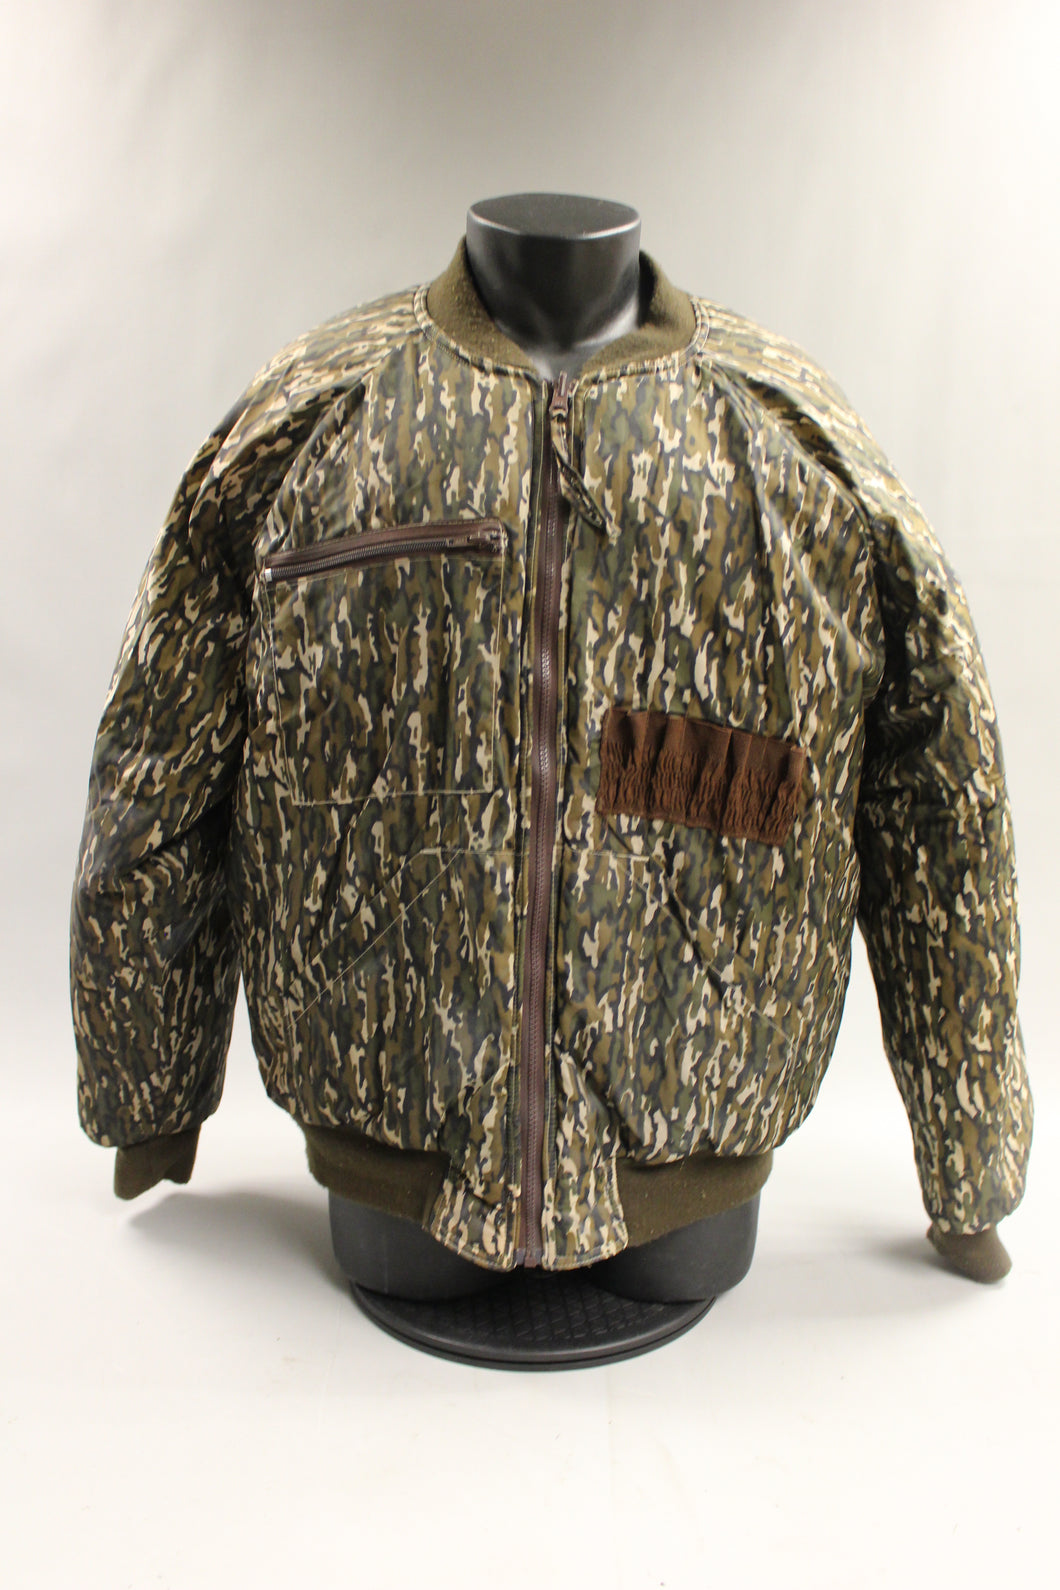 Gamehide Style No 97 Hunting Hoodie Jacket Size XL -Camo -Used